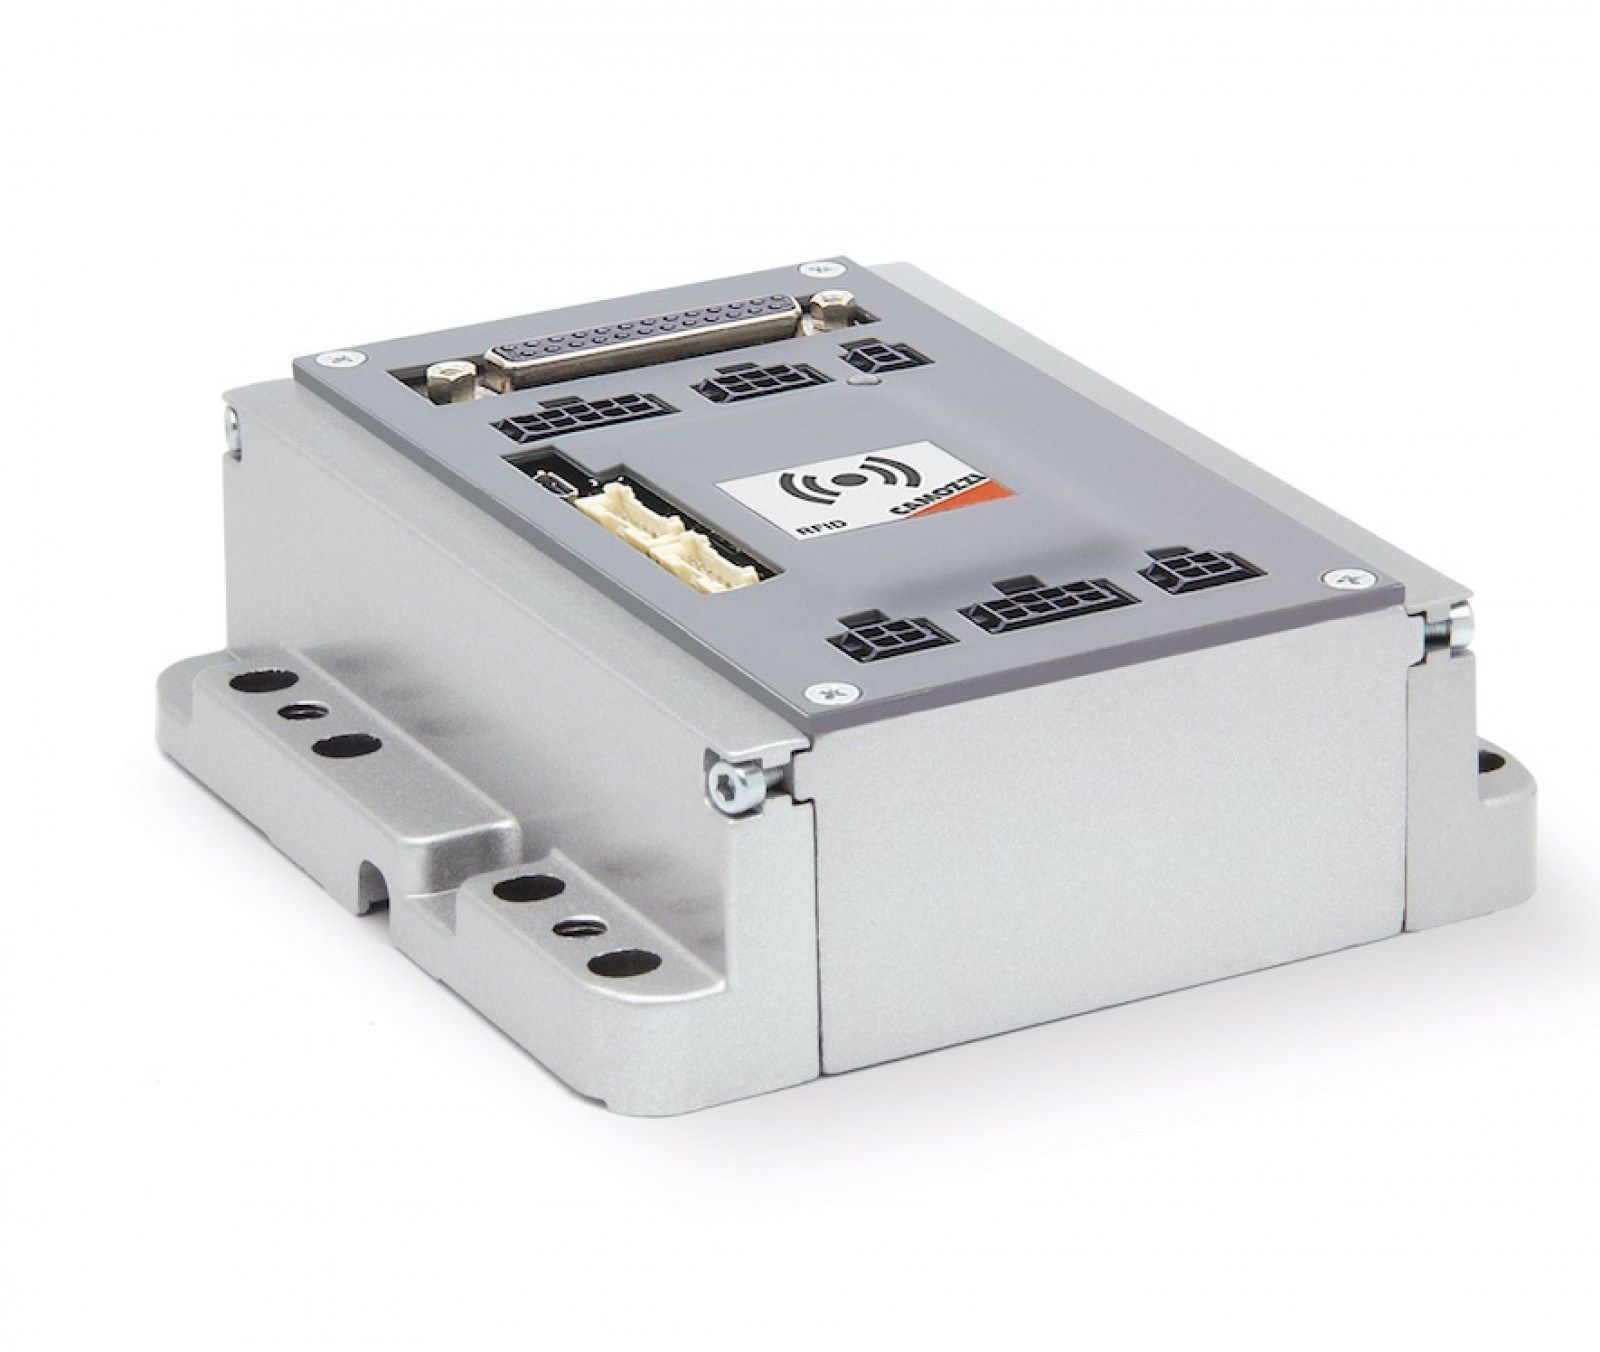 Camozzi launches series drcs drives for stepper mo...